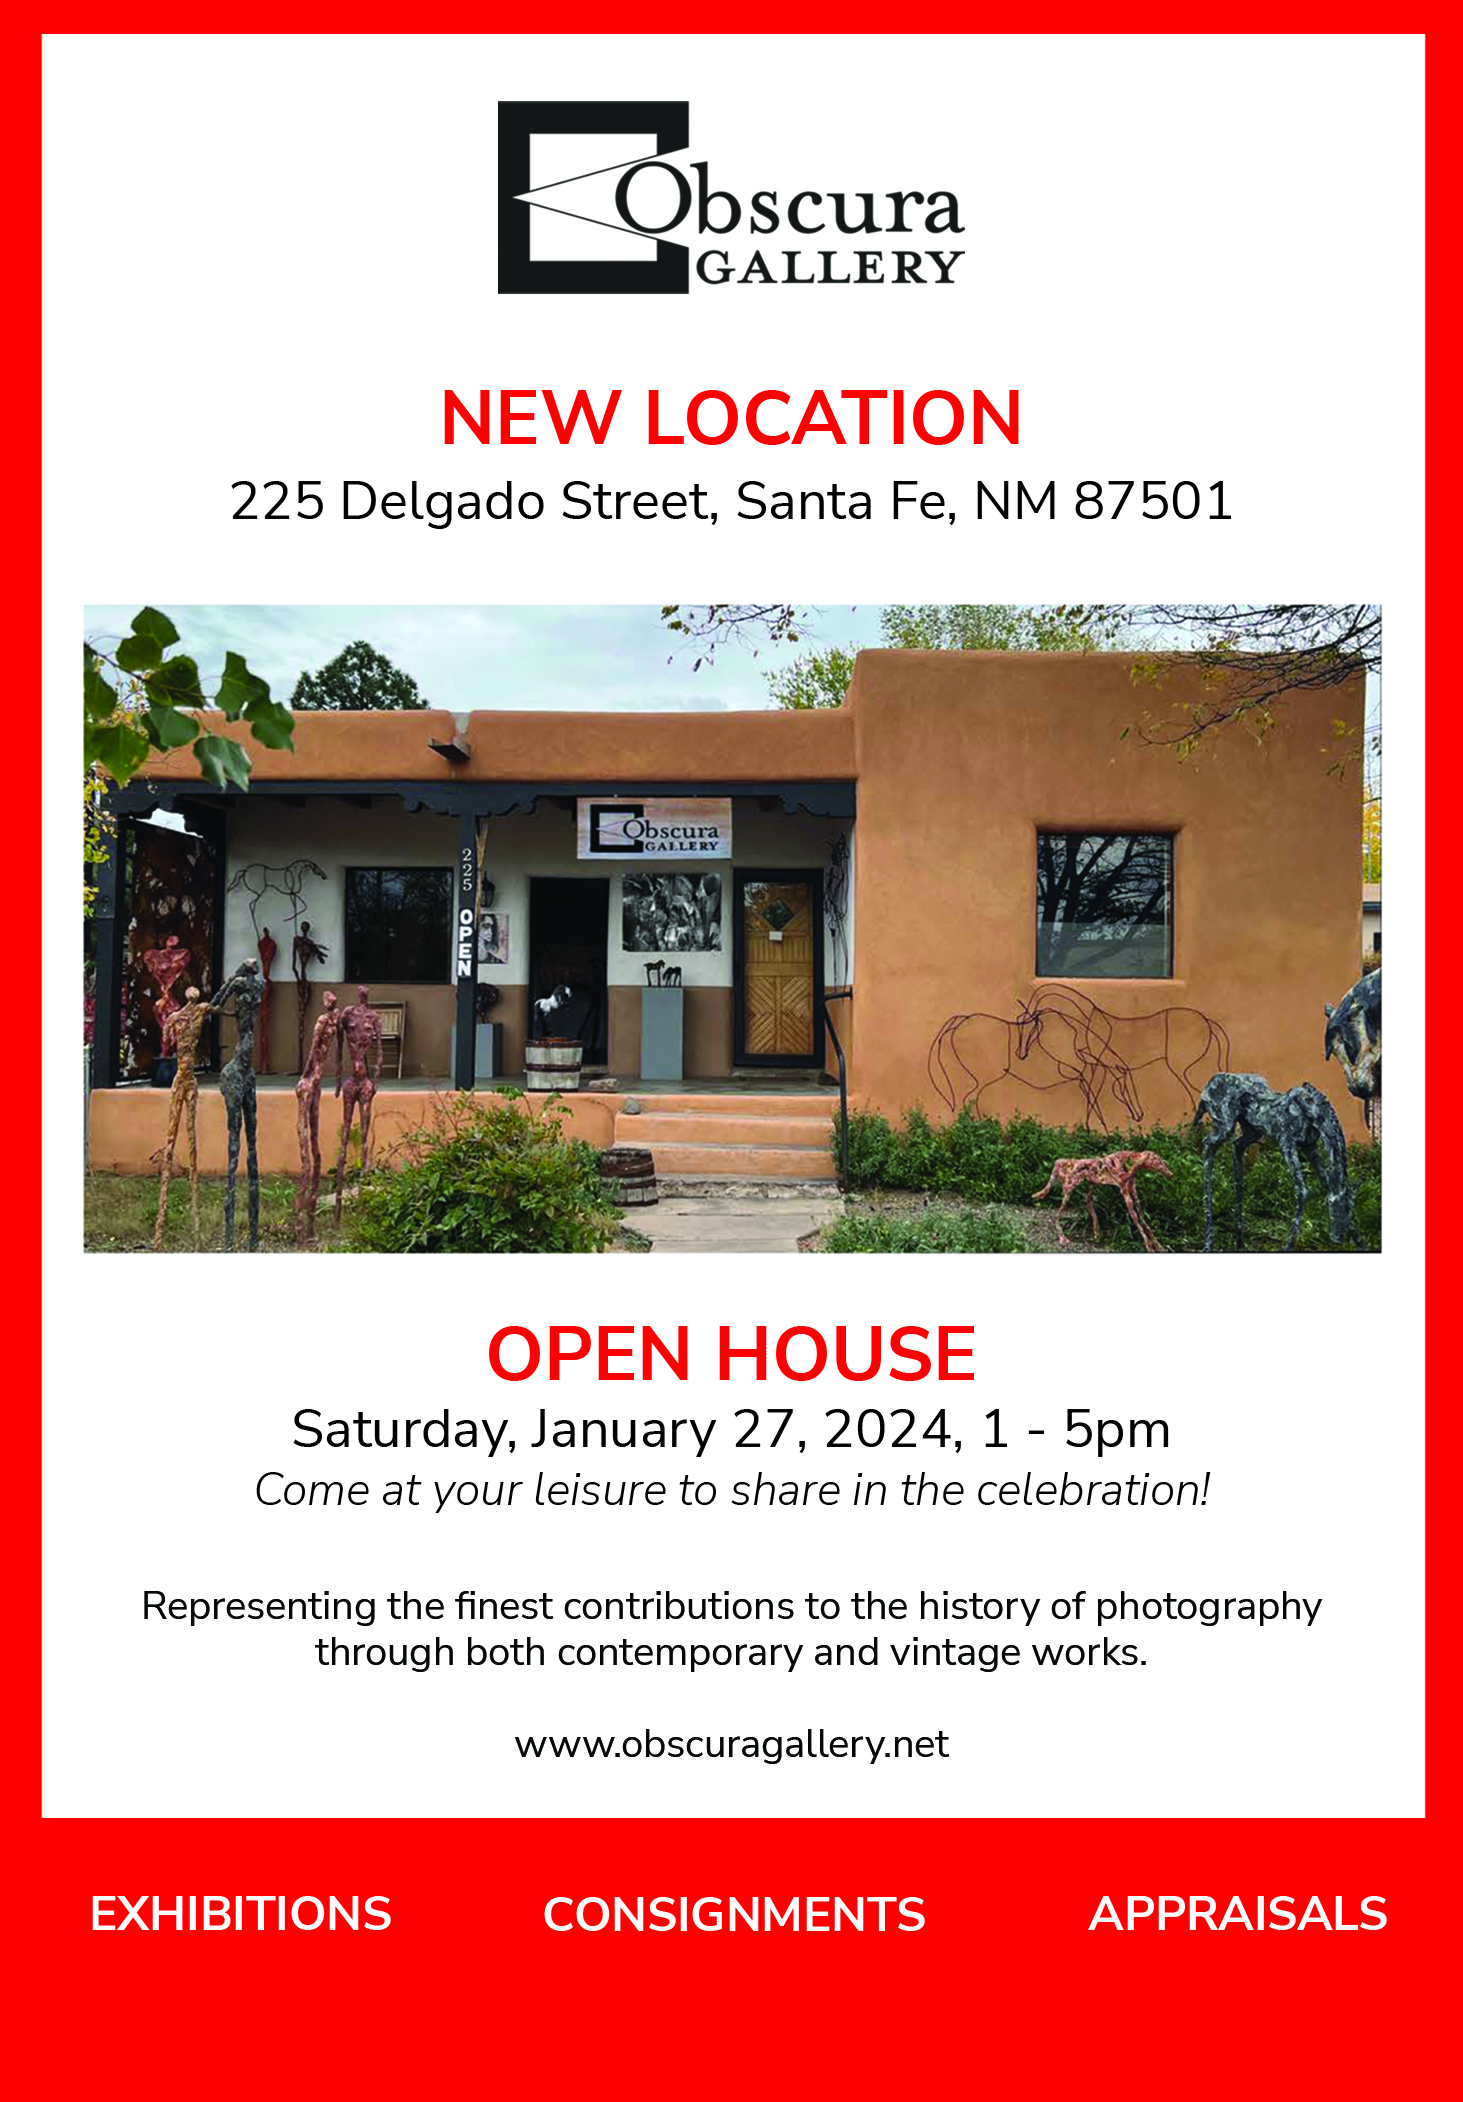 Obscura Gallery new location at 225 Delgado Street. Come celebrate with us during an open house on January 27 from 1-5pm.